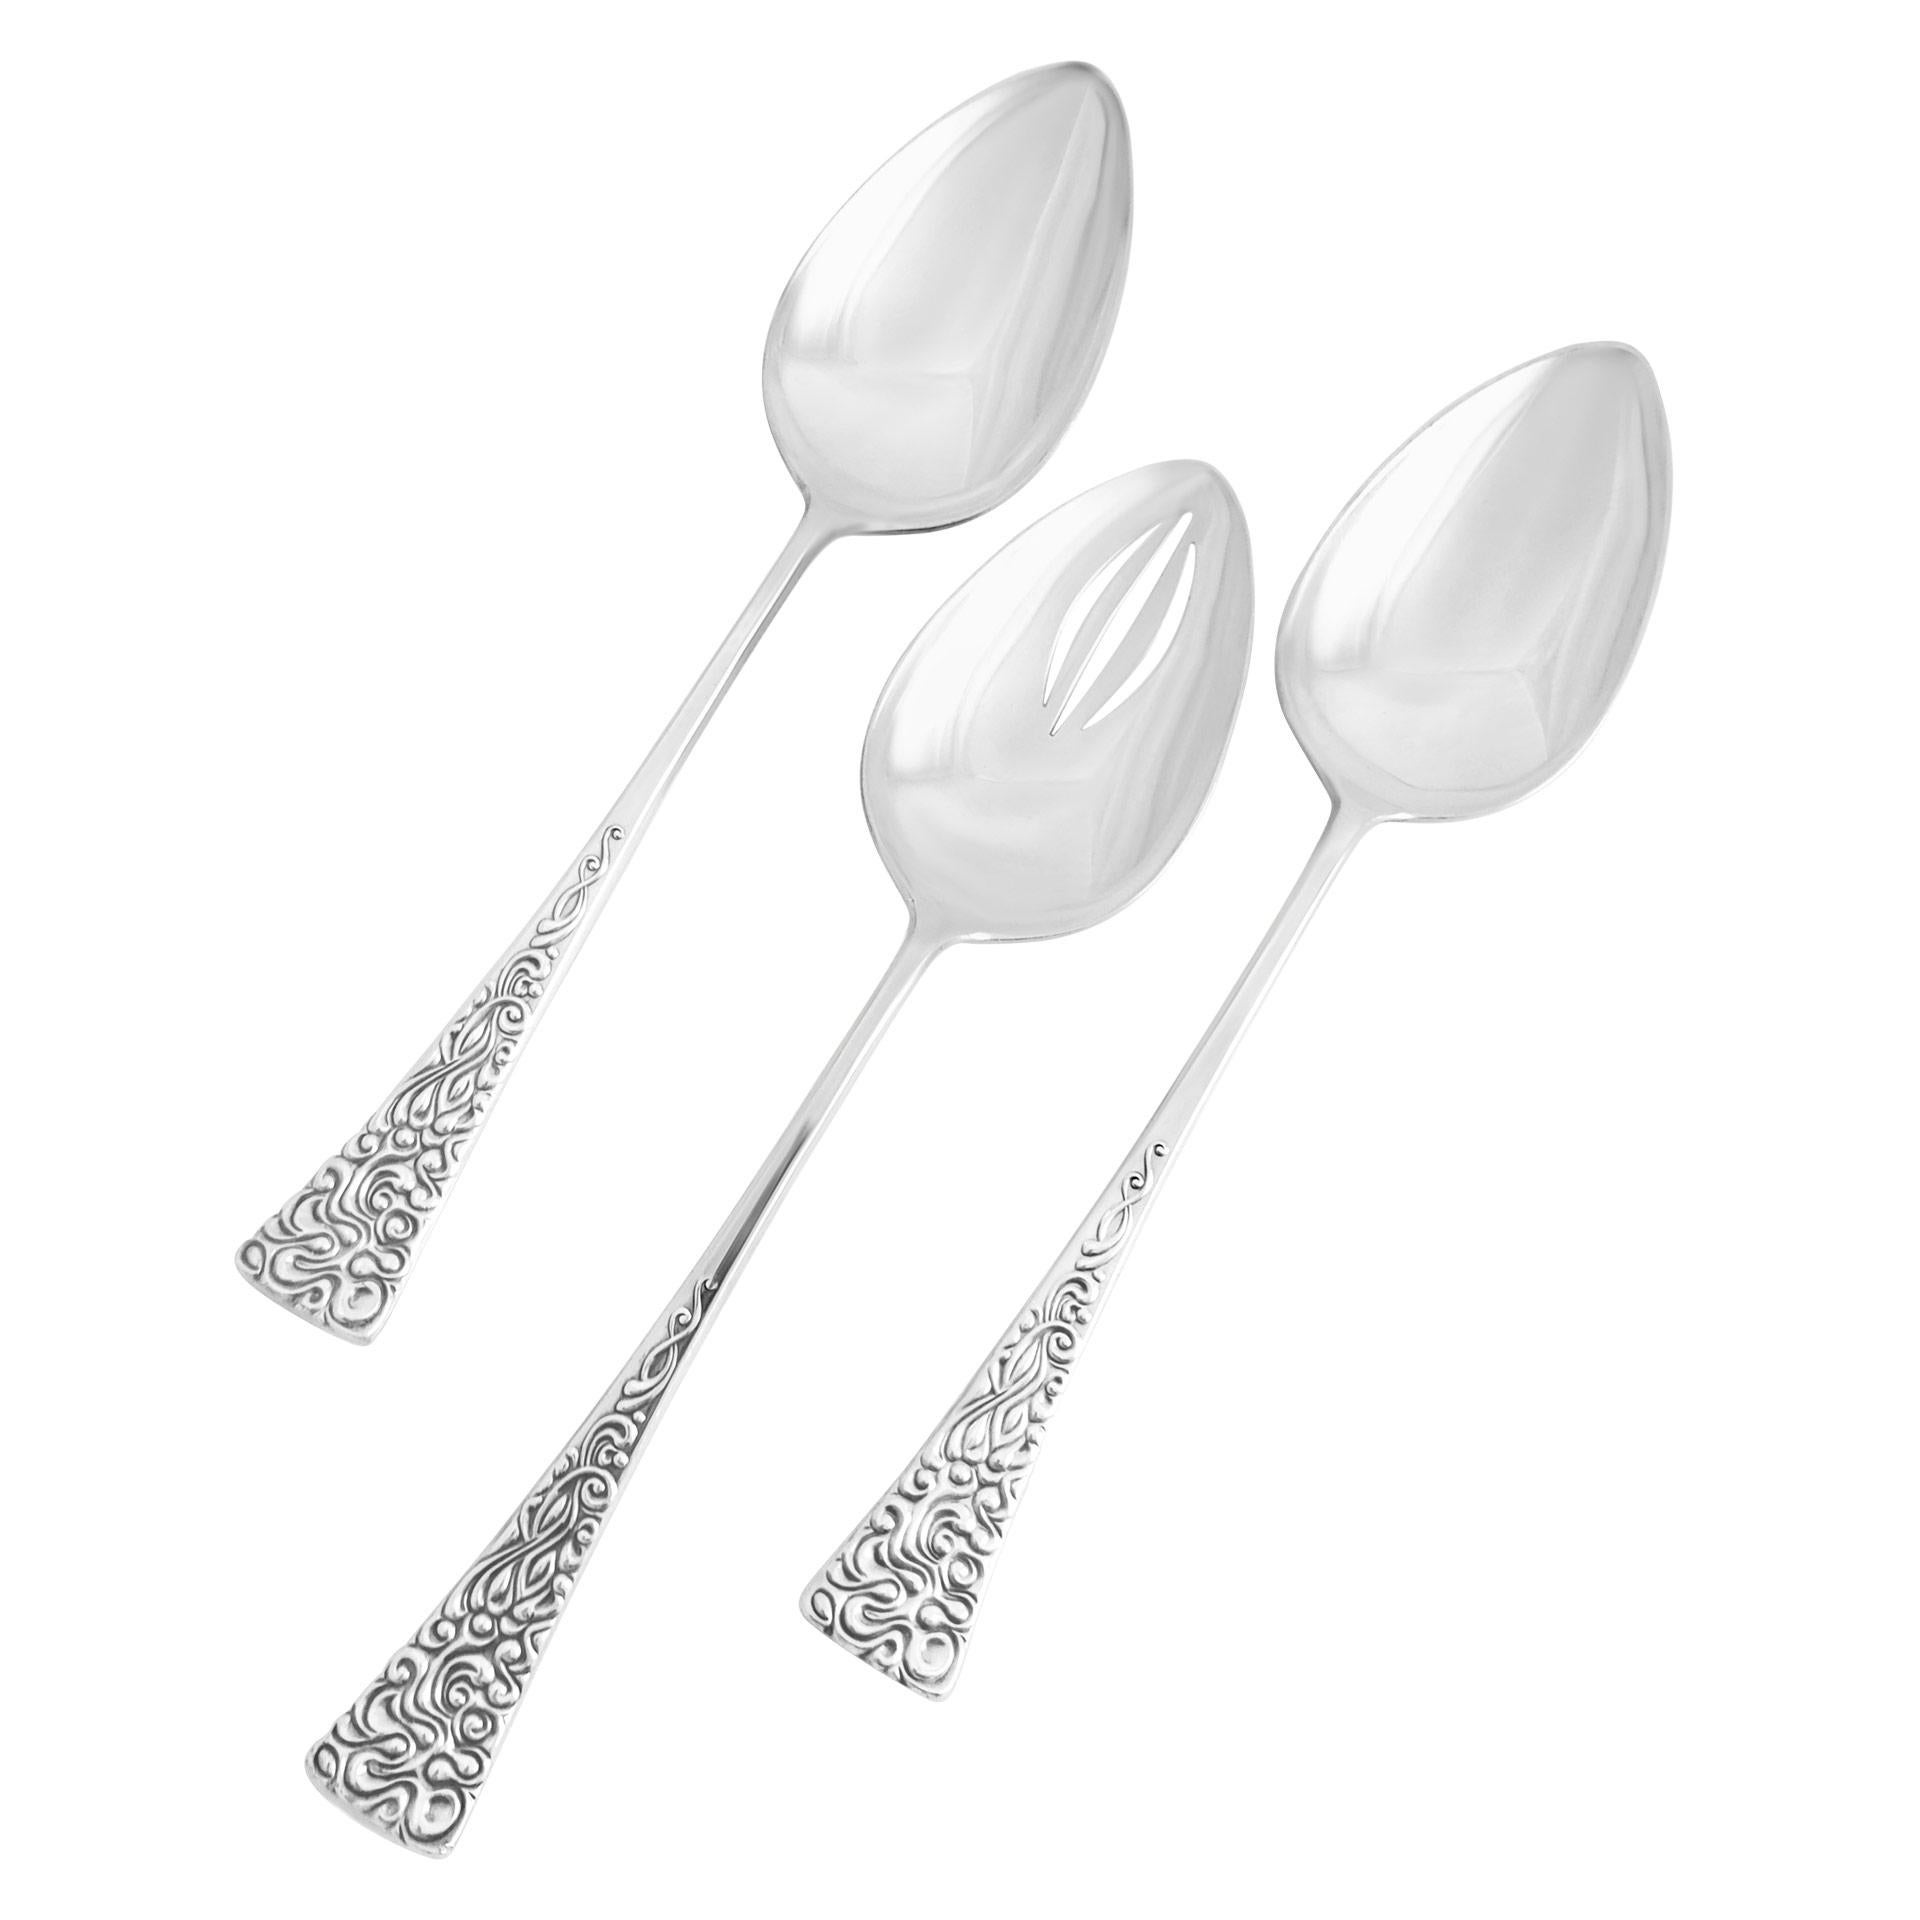 TAPESTRY Sterling Silver Flarware Set by Reed & Barton, patented in 1964. 7 place settings for 12 with 4 serving pieces. Over 3000 grams sterling silver. PLACE SETTINGS: 12 dinner knives (9 1/4